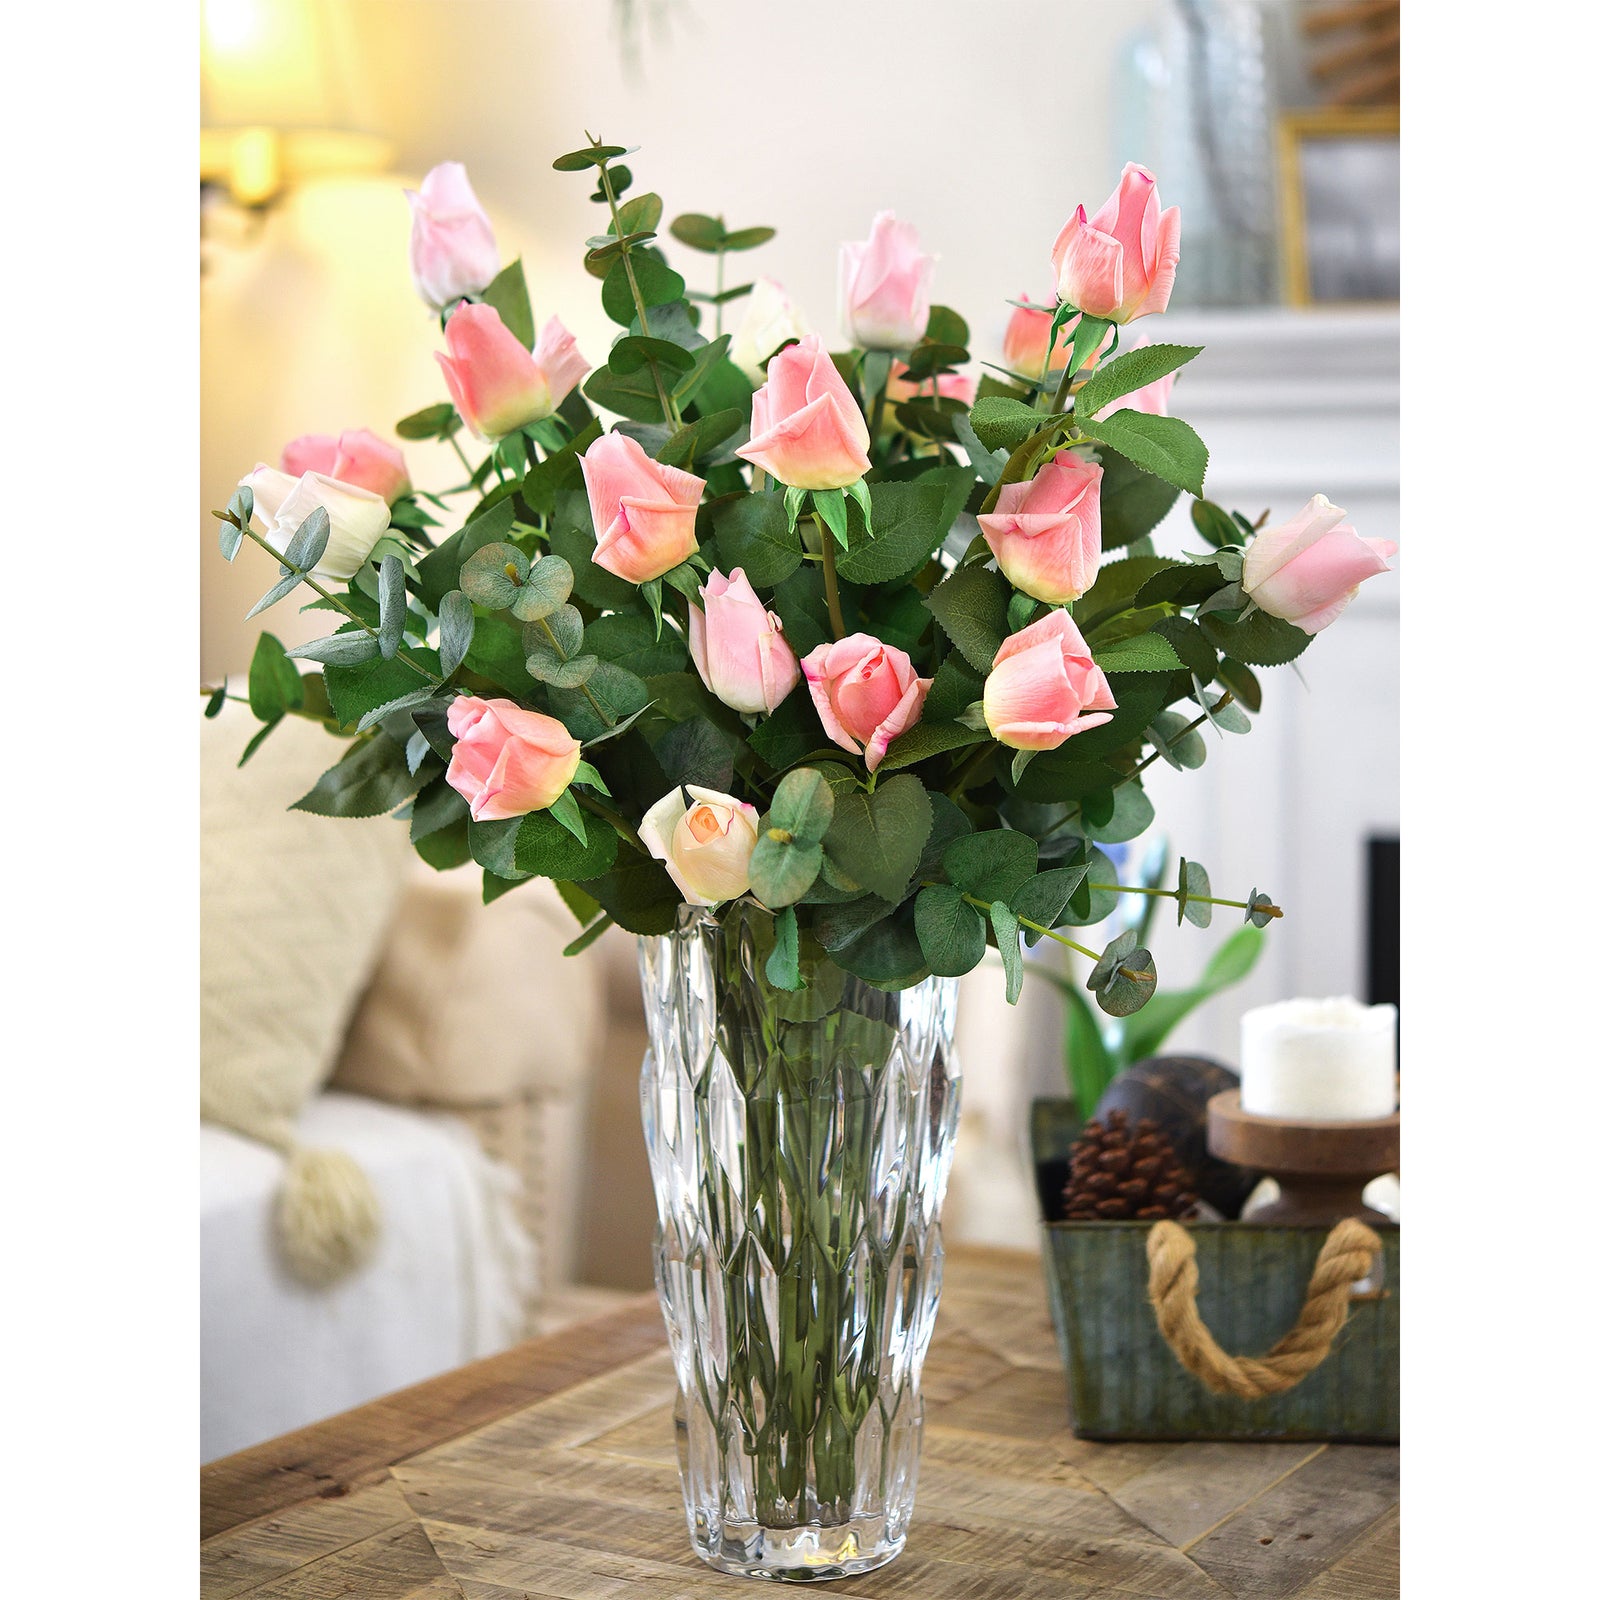 Flamingo Wild Pink Long Stem 21 inches Roses Real Touch Silk Artificial Flowers 12 Stems